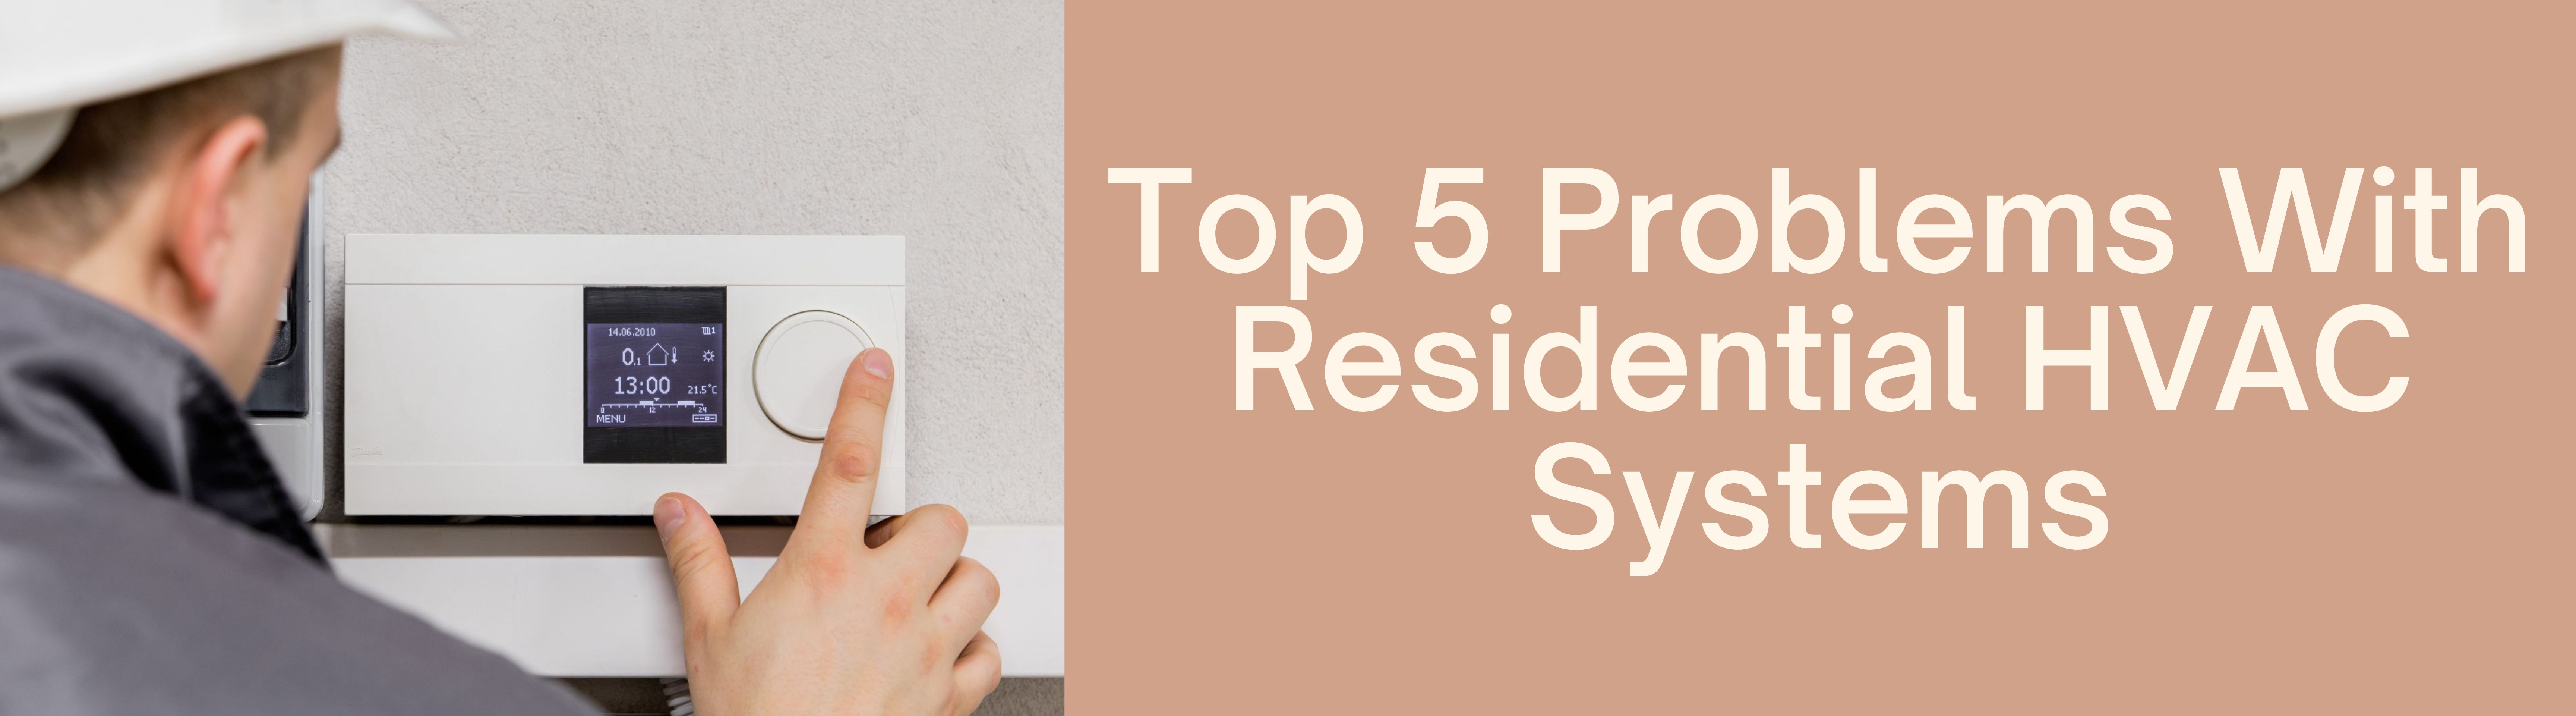 Image for Top 5 Problems With Residential HVAC Systems